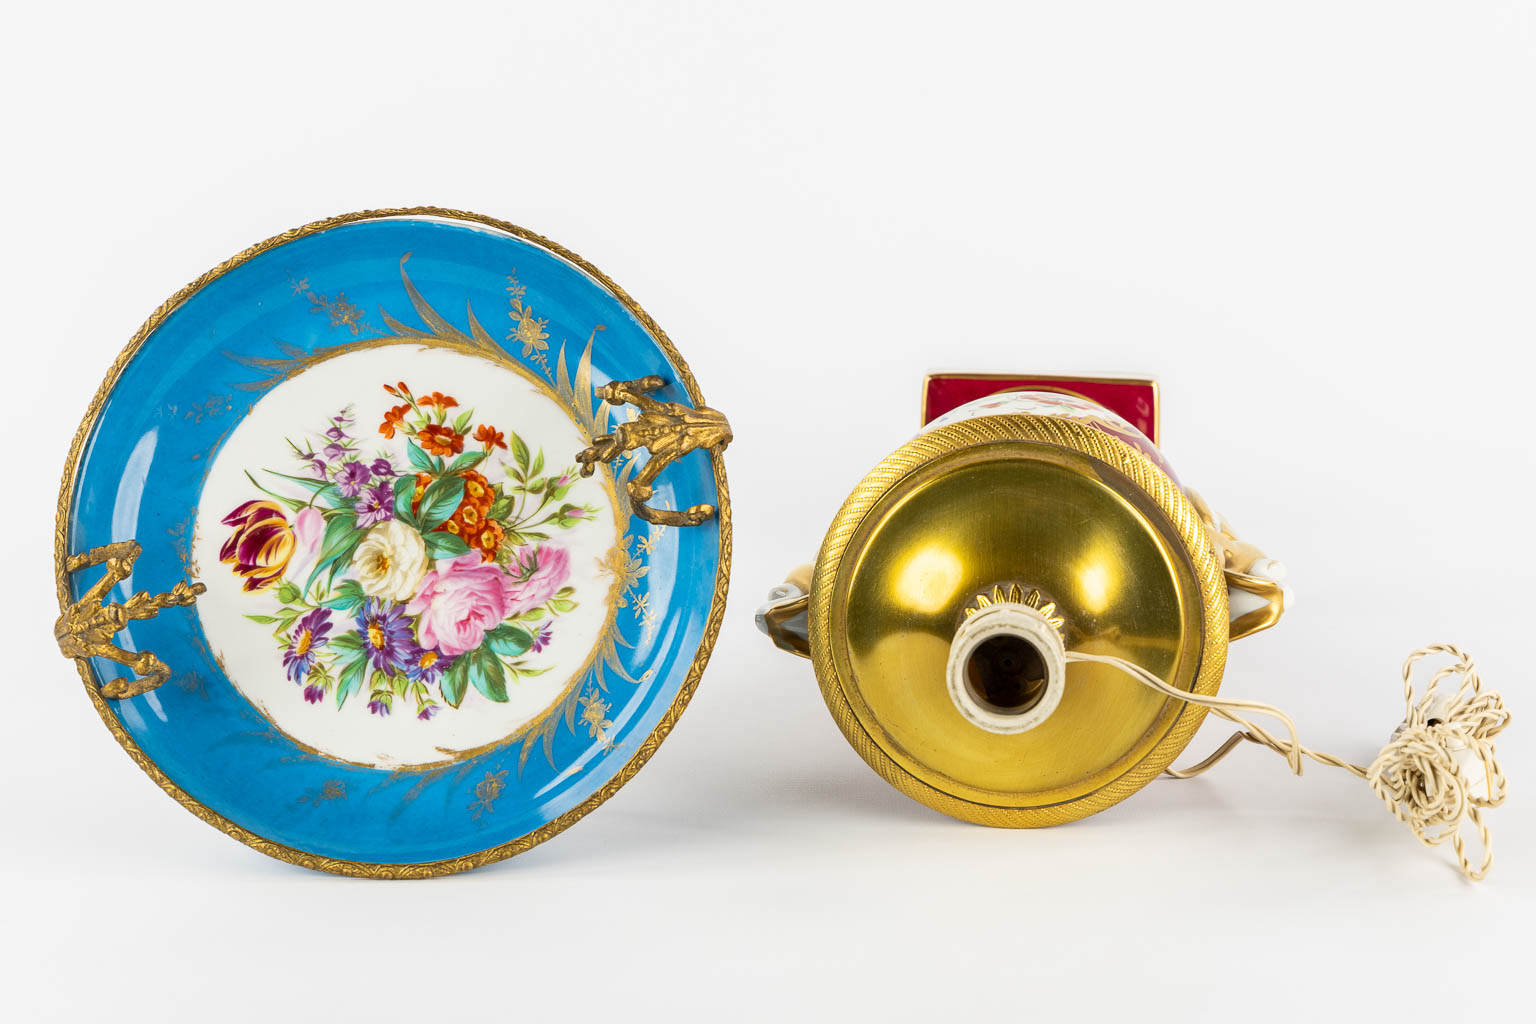 Limoges and Sèvres marks, a lamp base and a tazza with a hand-painted flower decor. (H:40 cm) - Image 10 of 14